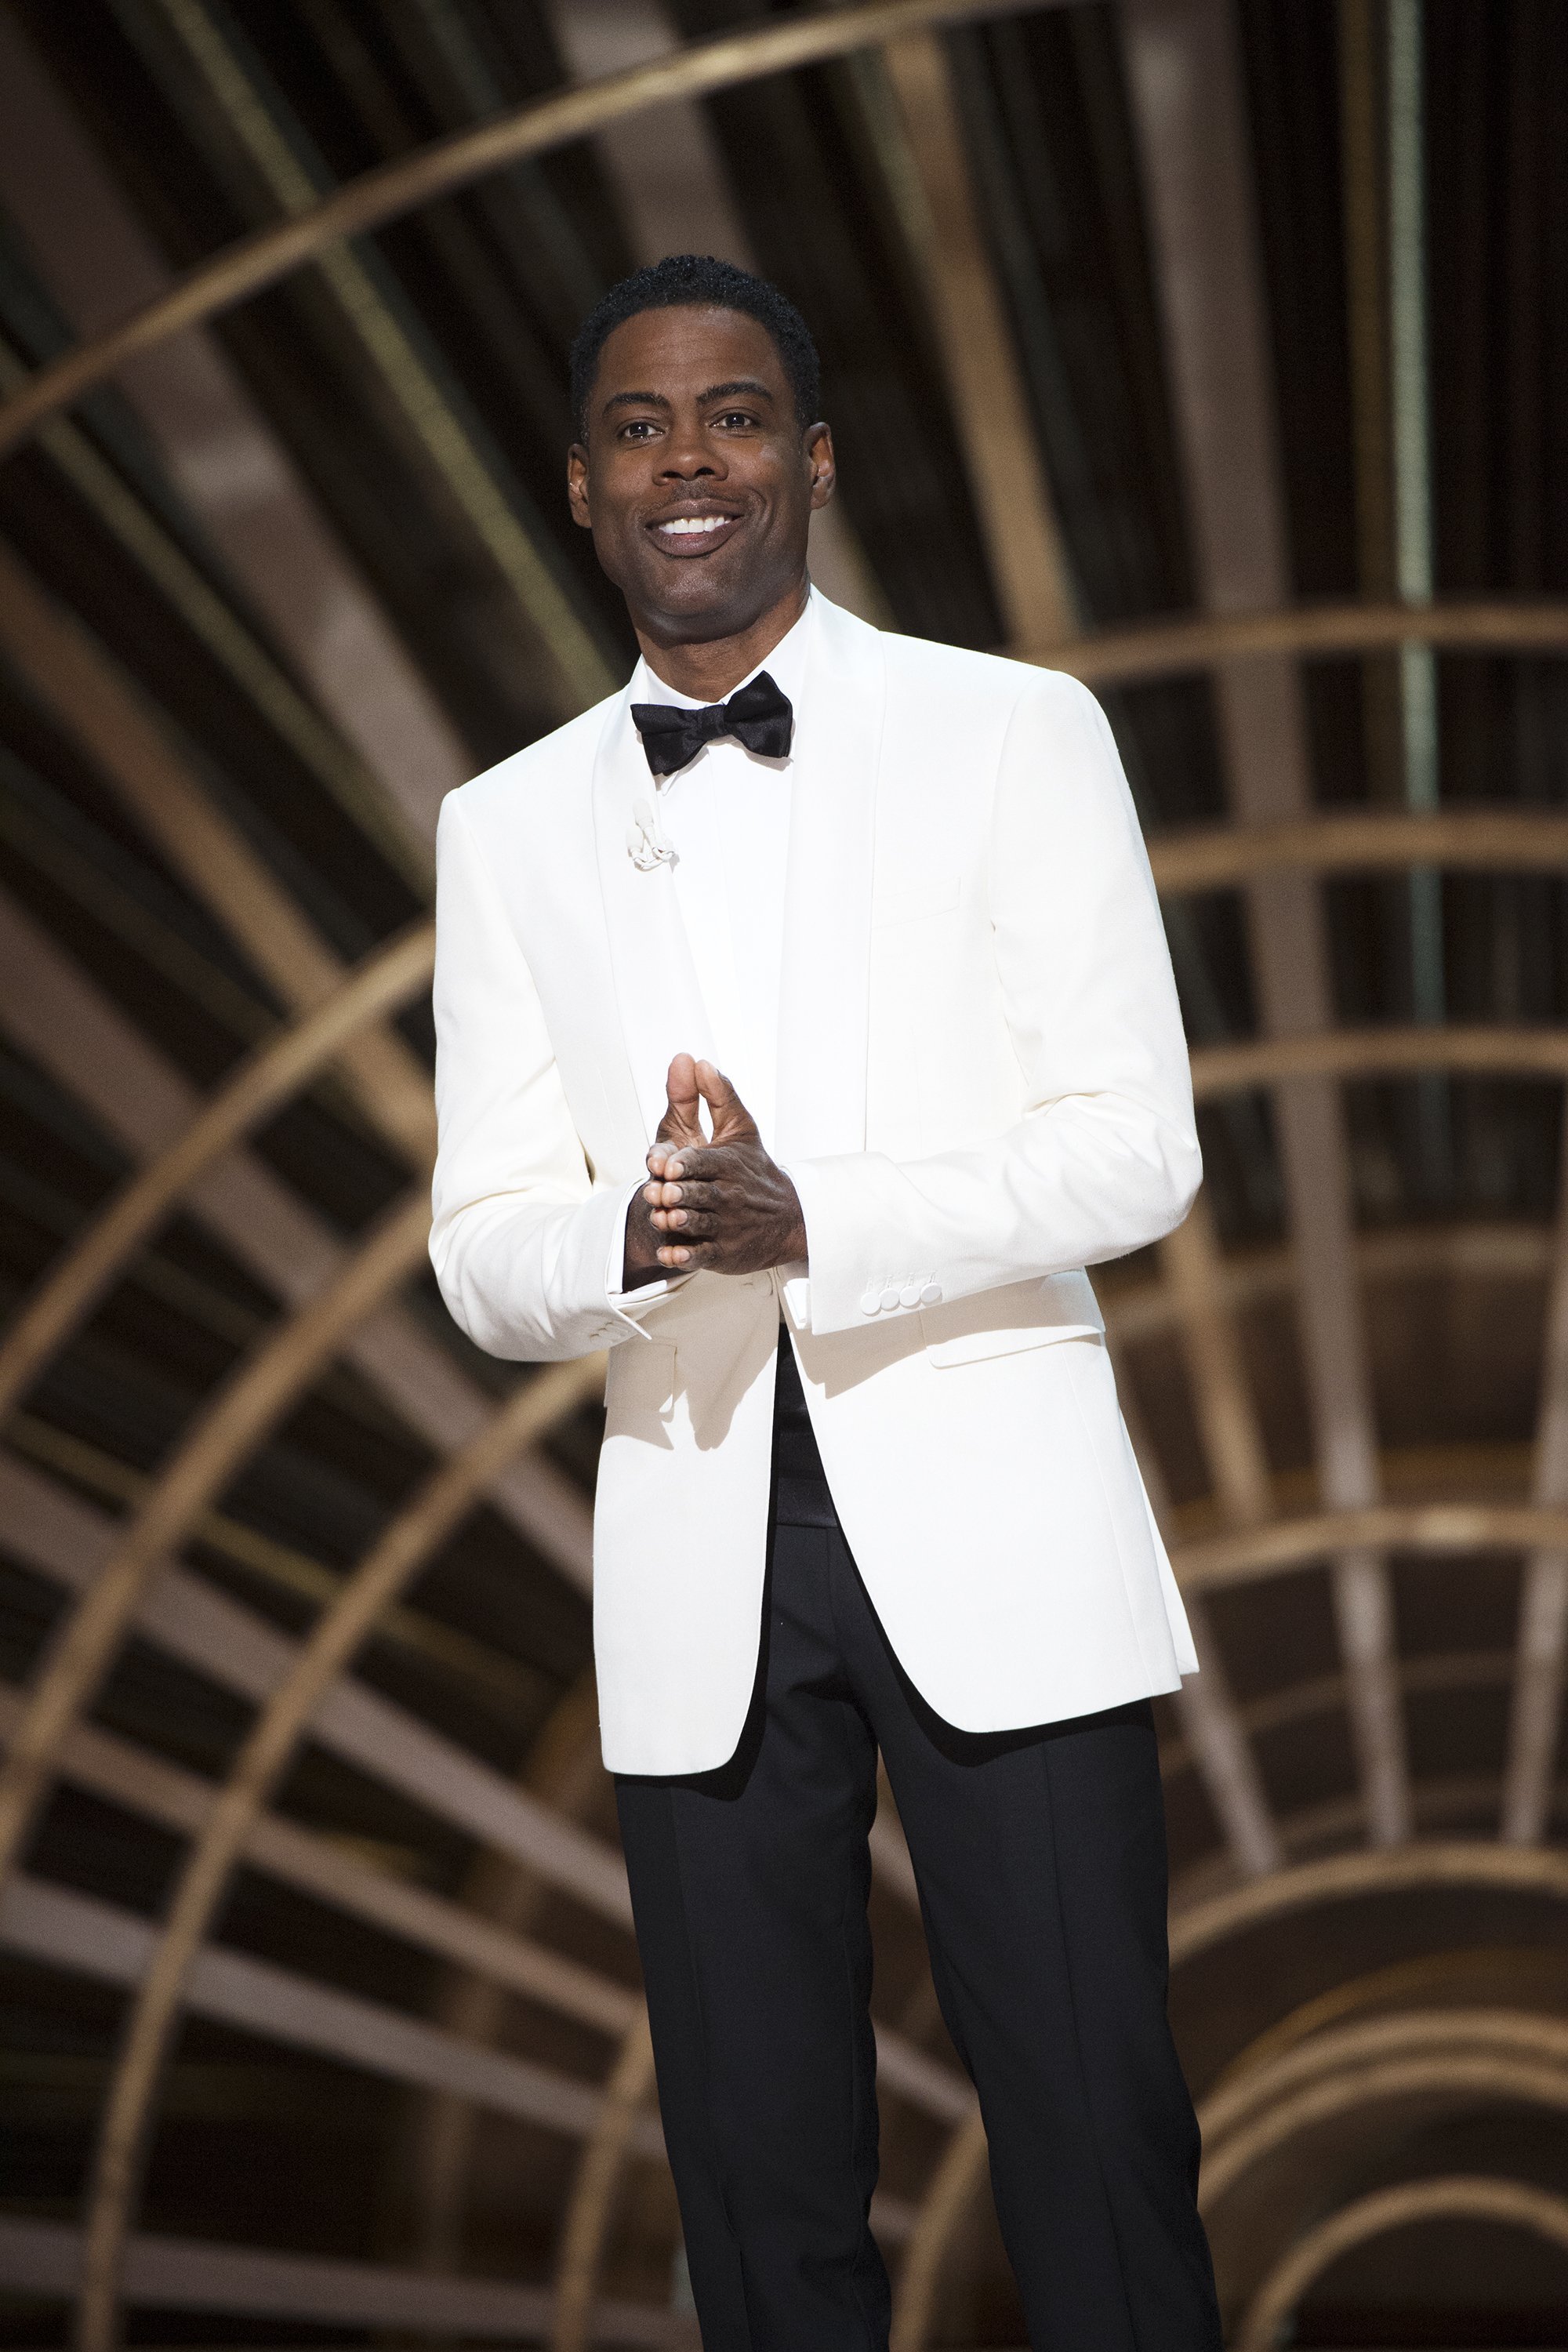 Chris Rock during the 88th Academy Awards.